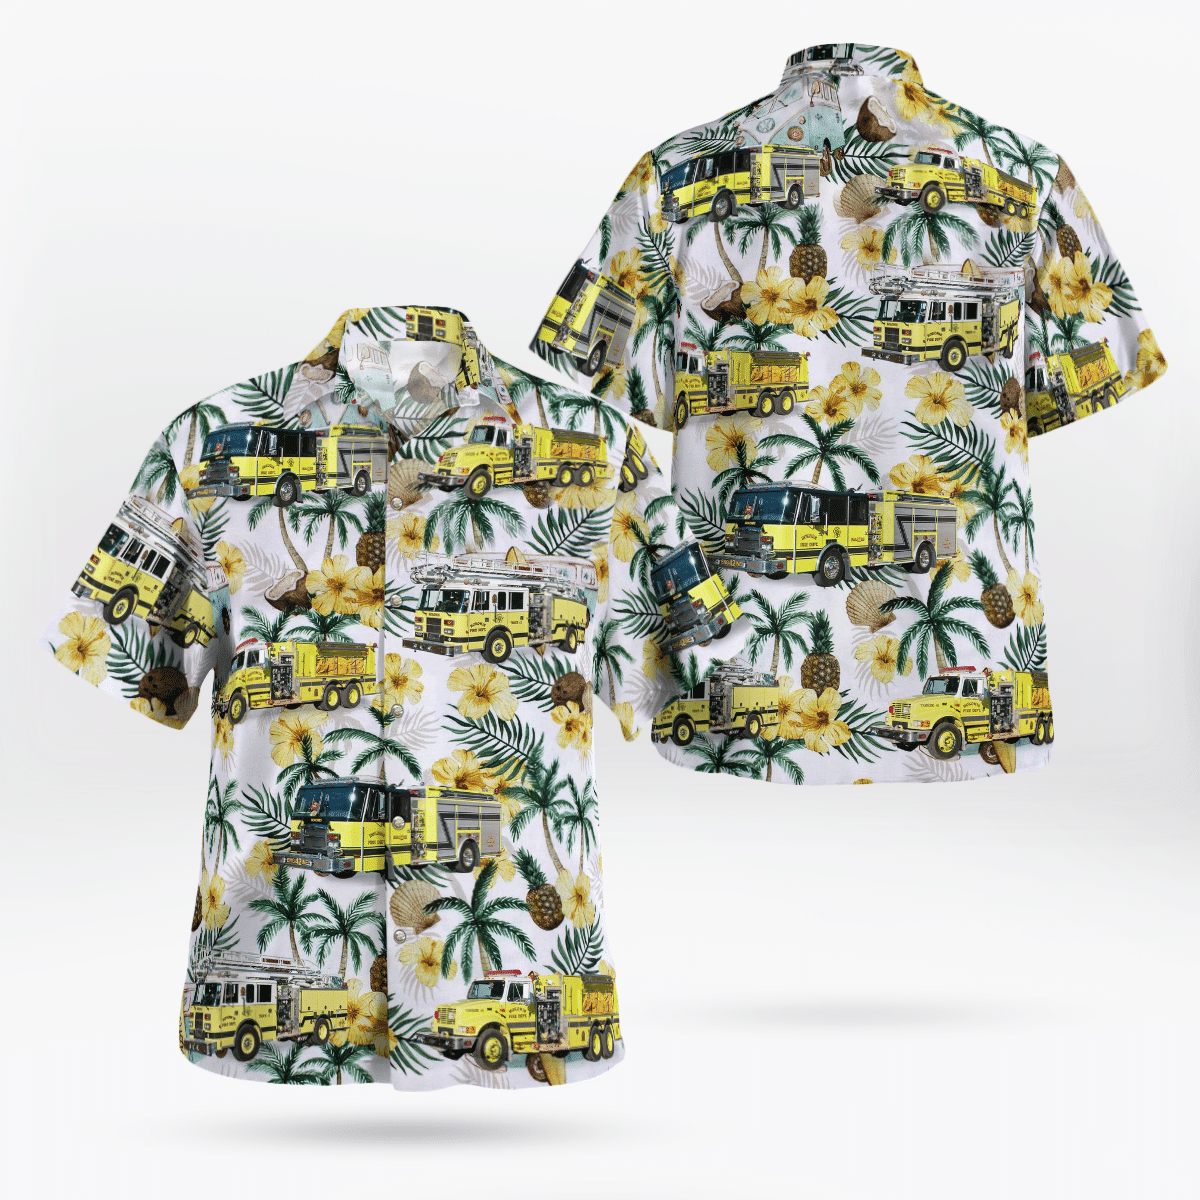 Shop now to find the perfect Hawaii Shirt for your hobby 25